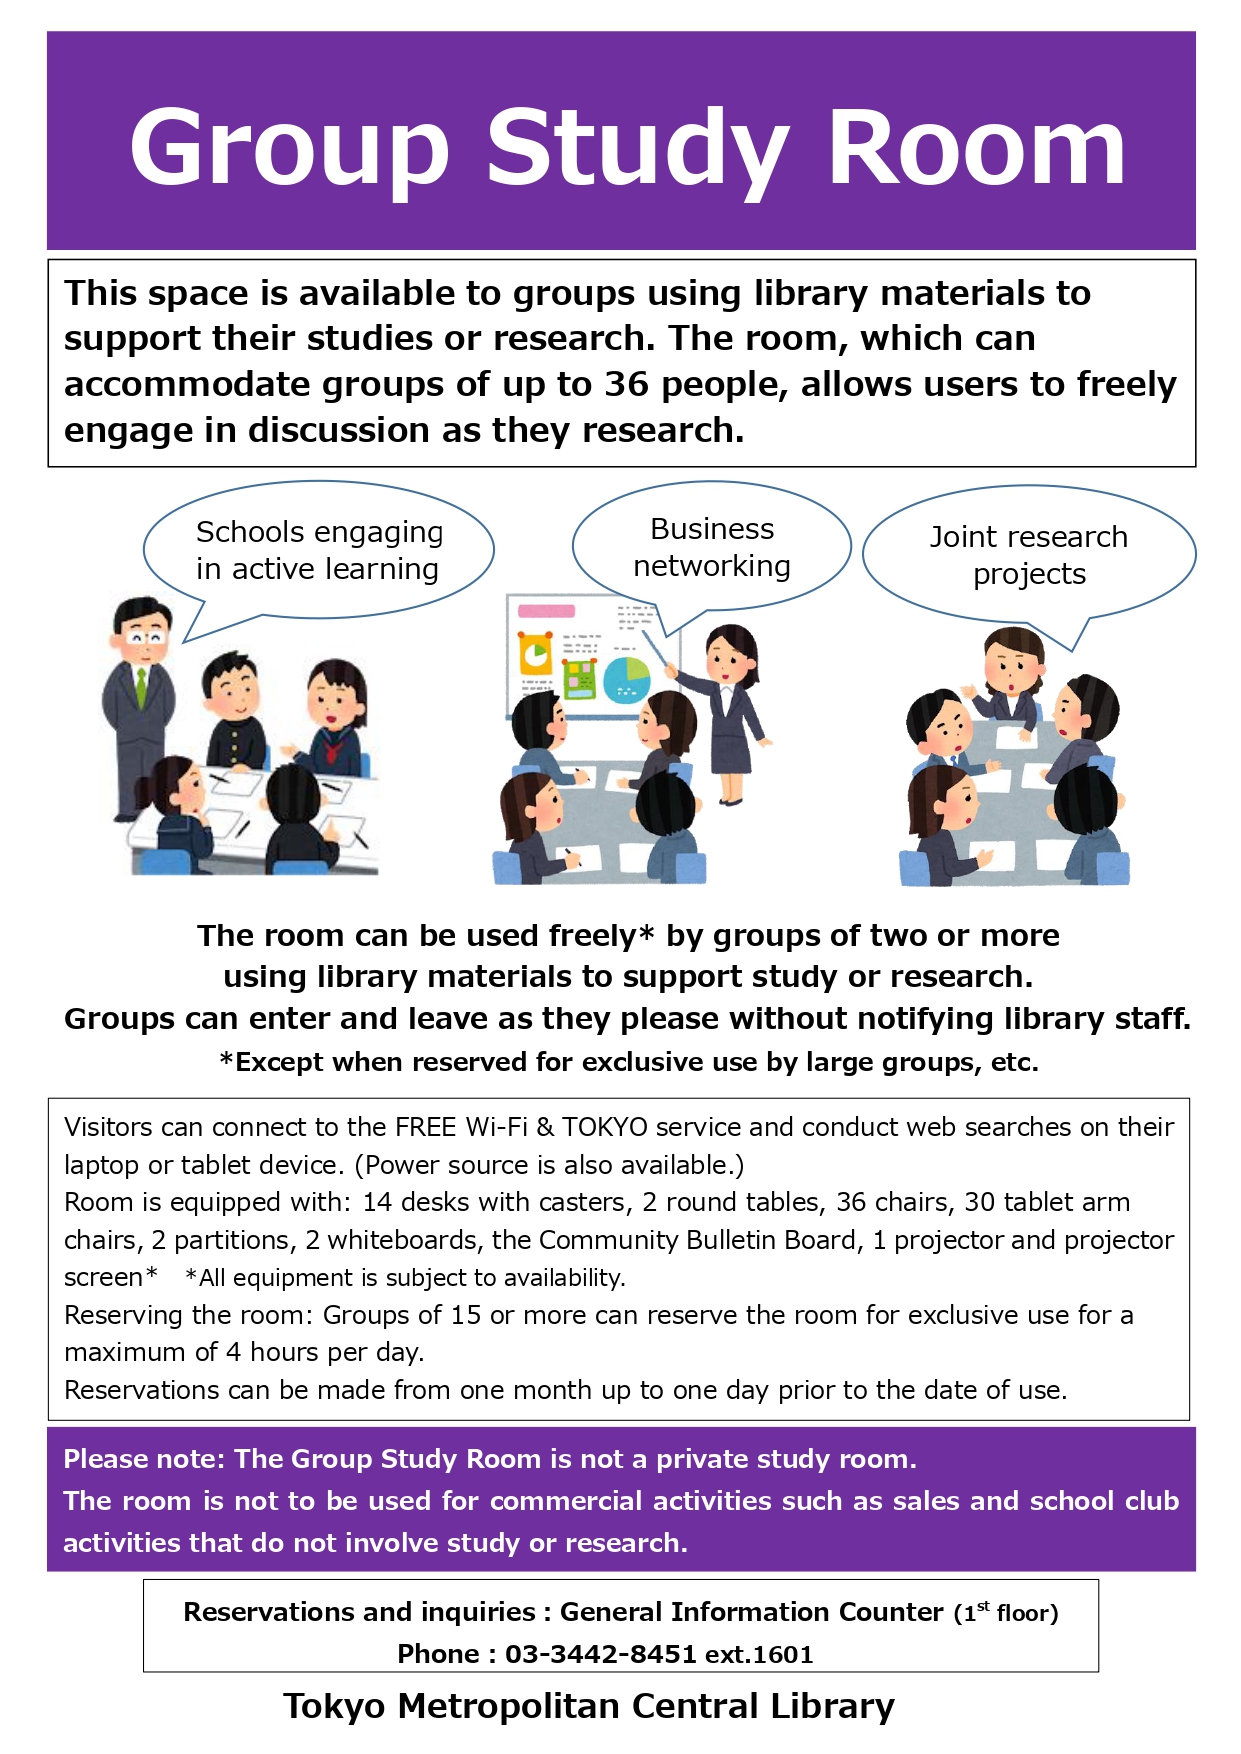 image: Information about the Group Study Room